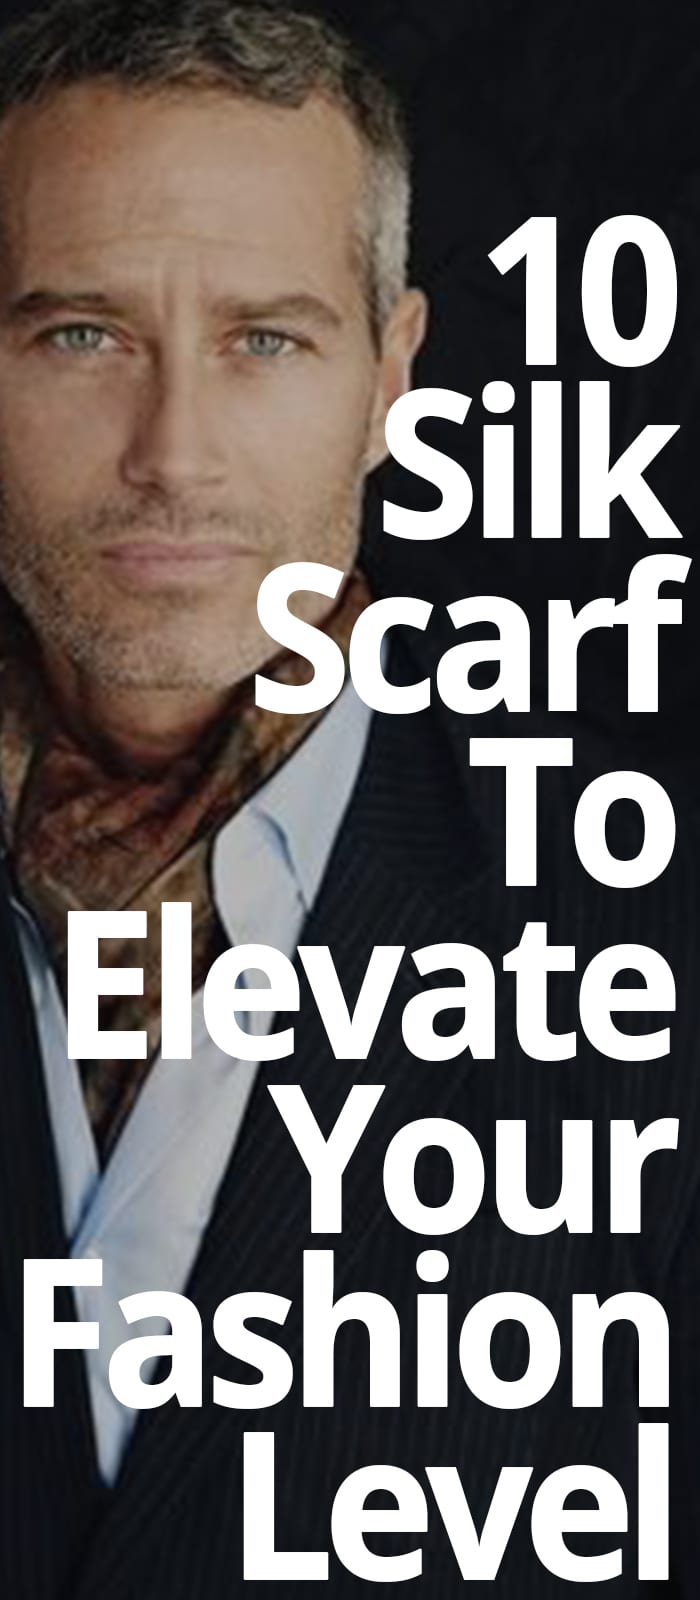 SILK SCARF TO ELEVATE YOUR FASHION LEVEL